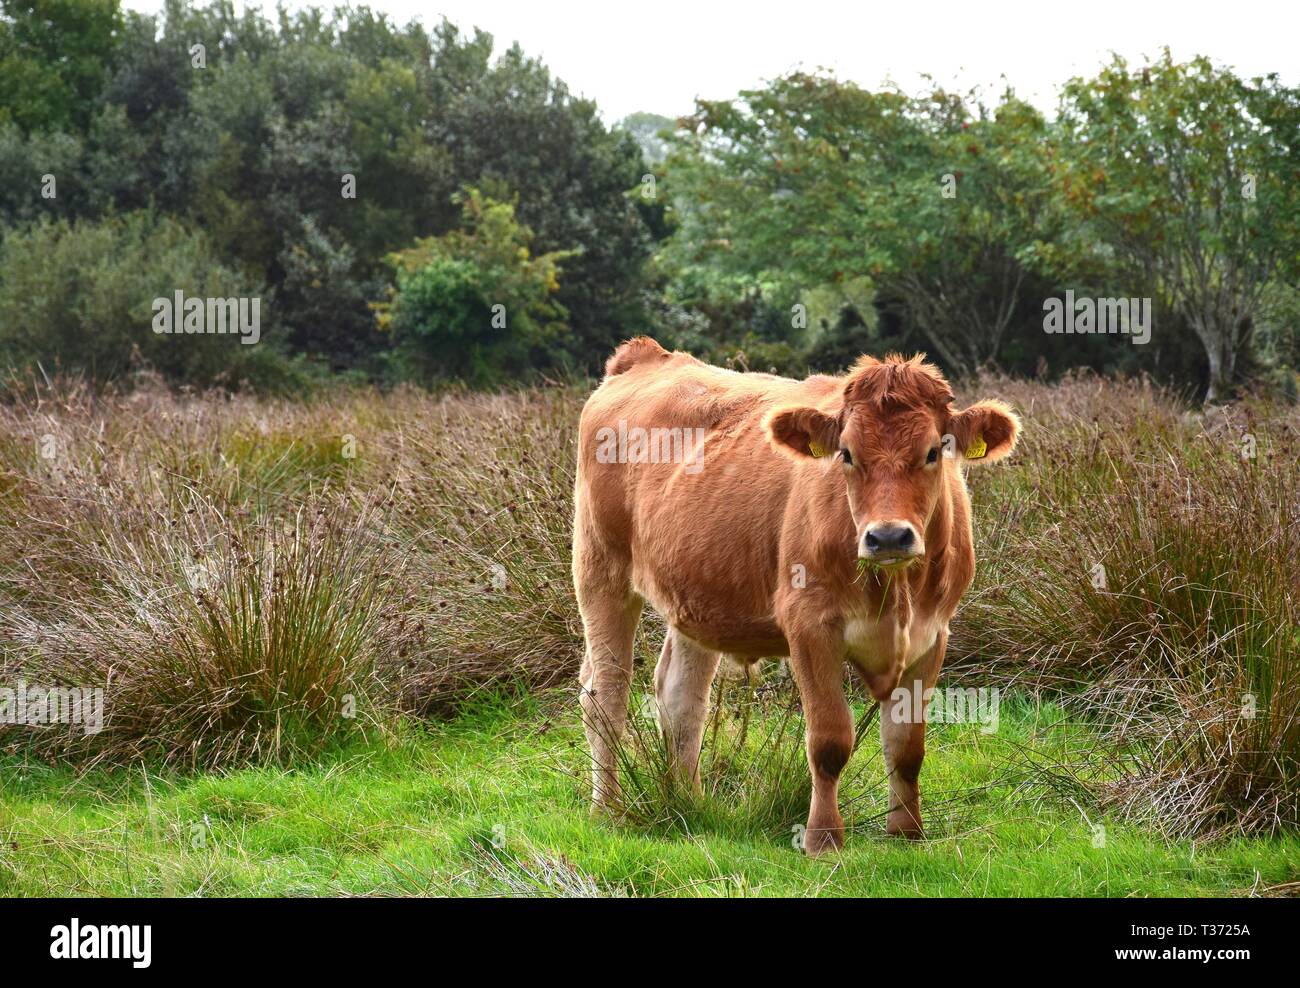 A brown cattle on a meadow in Ireland. Stock Photo